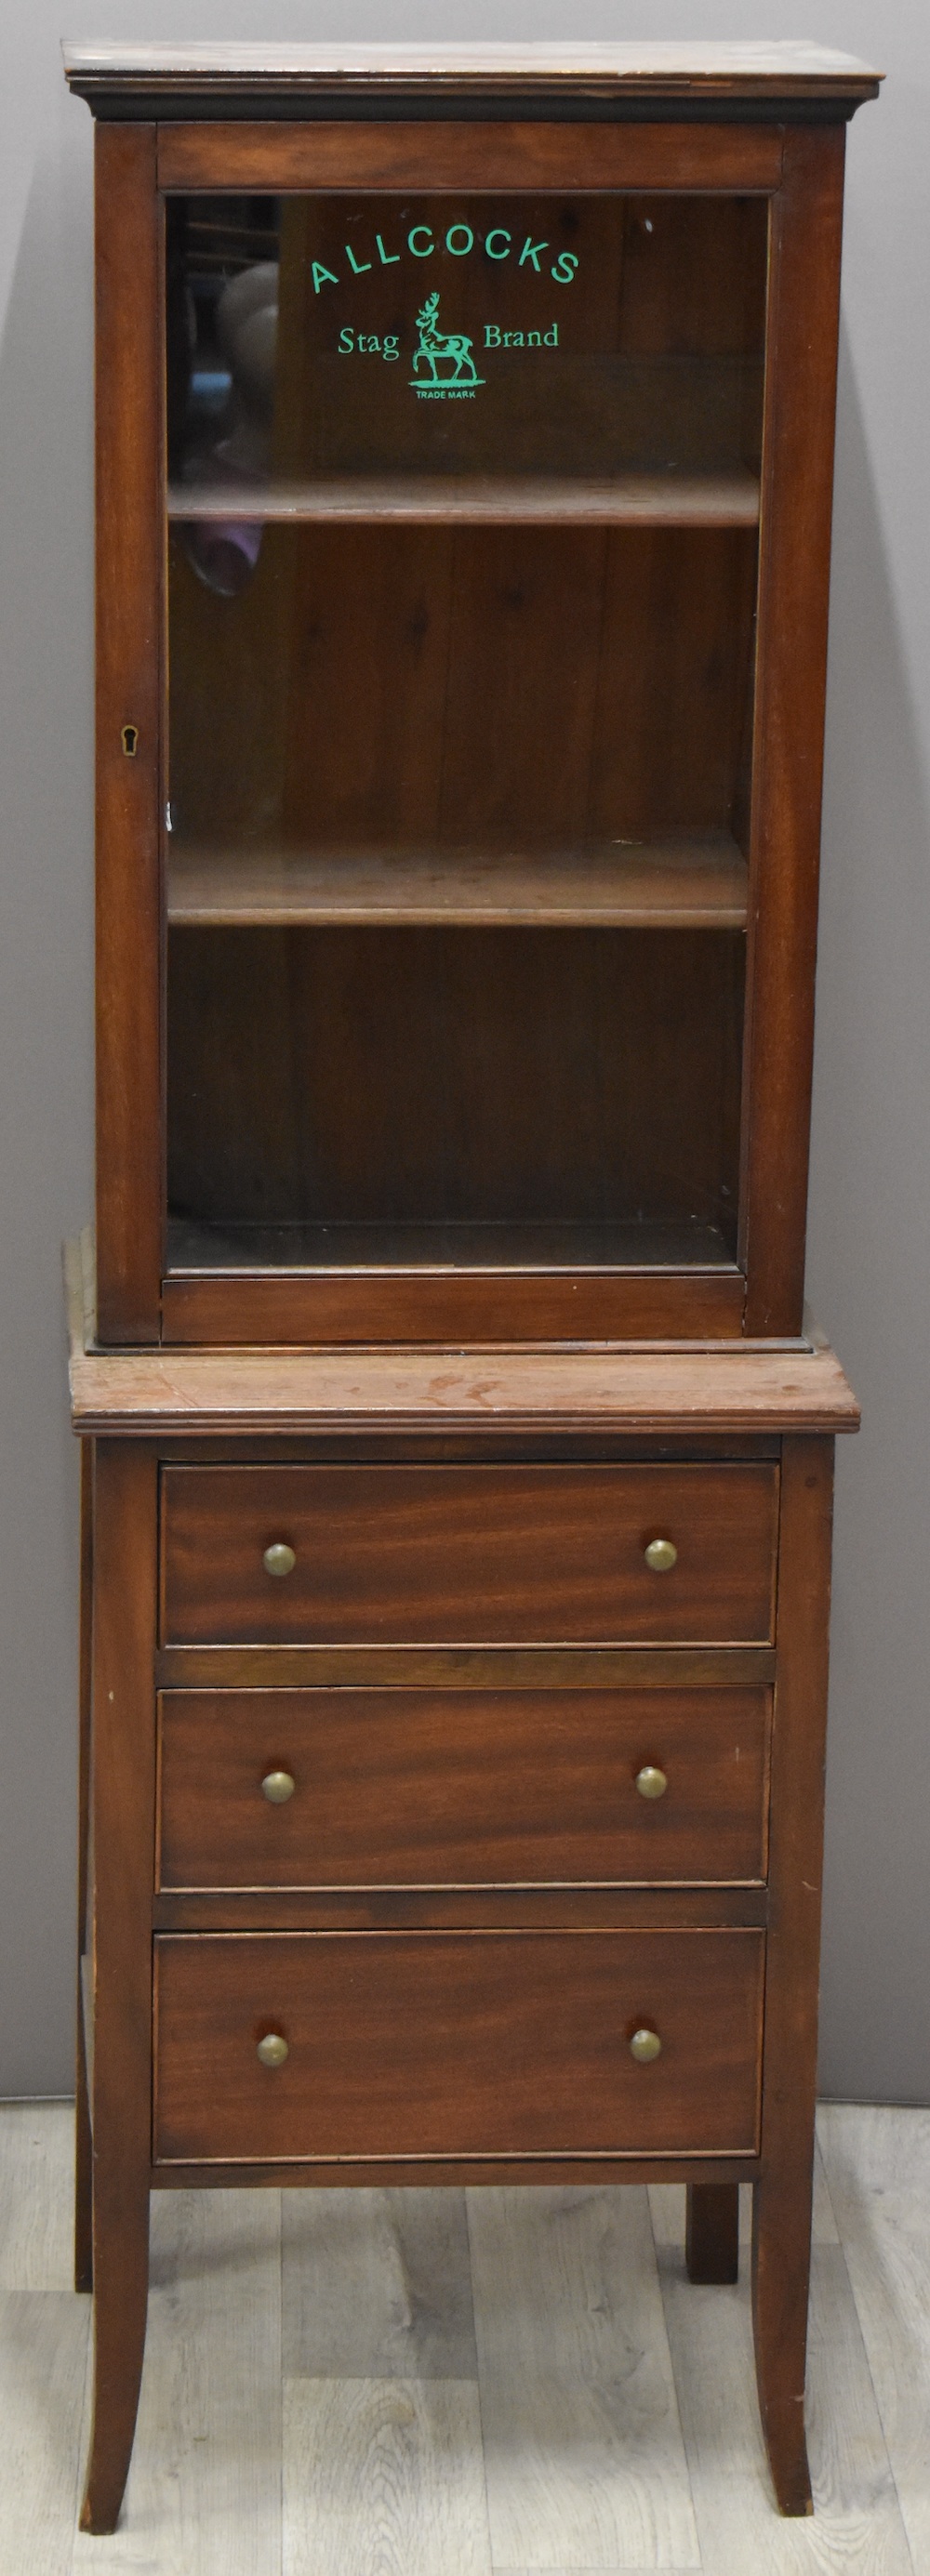 A Mahogany Glazed Allcocks Shop Advertising Cabinet. Sold For £130